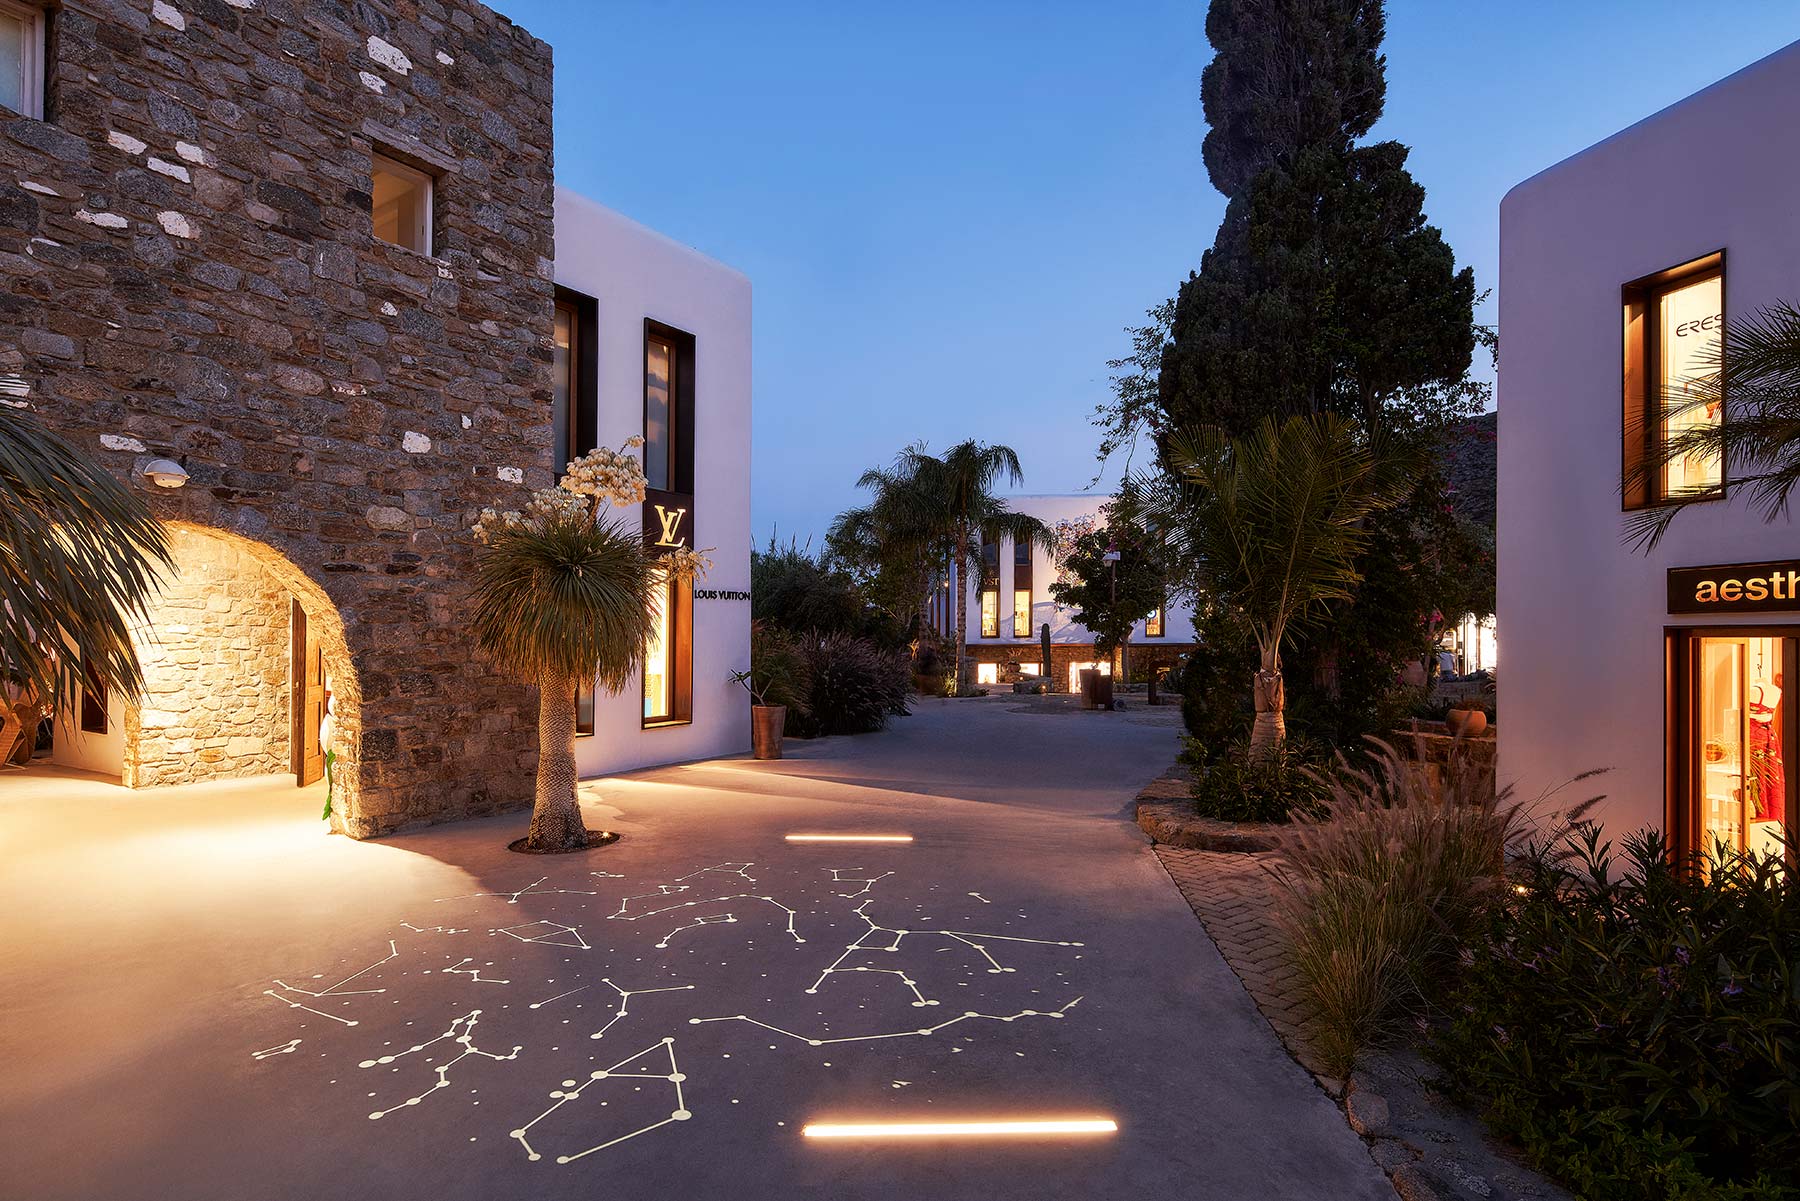 CHANEL Launches A New Location in Namos Village, Mykonos